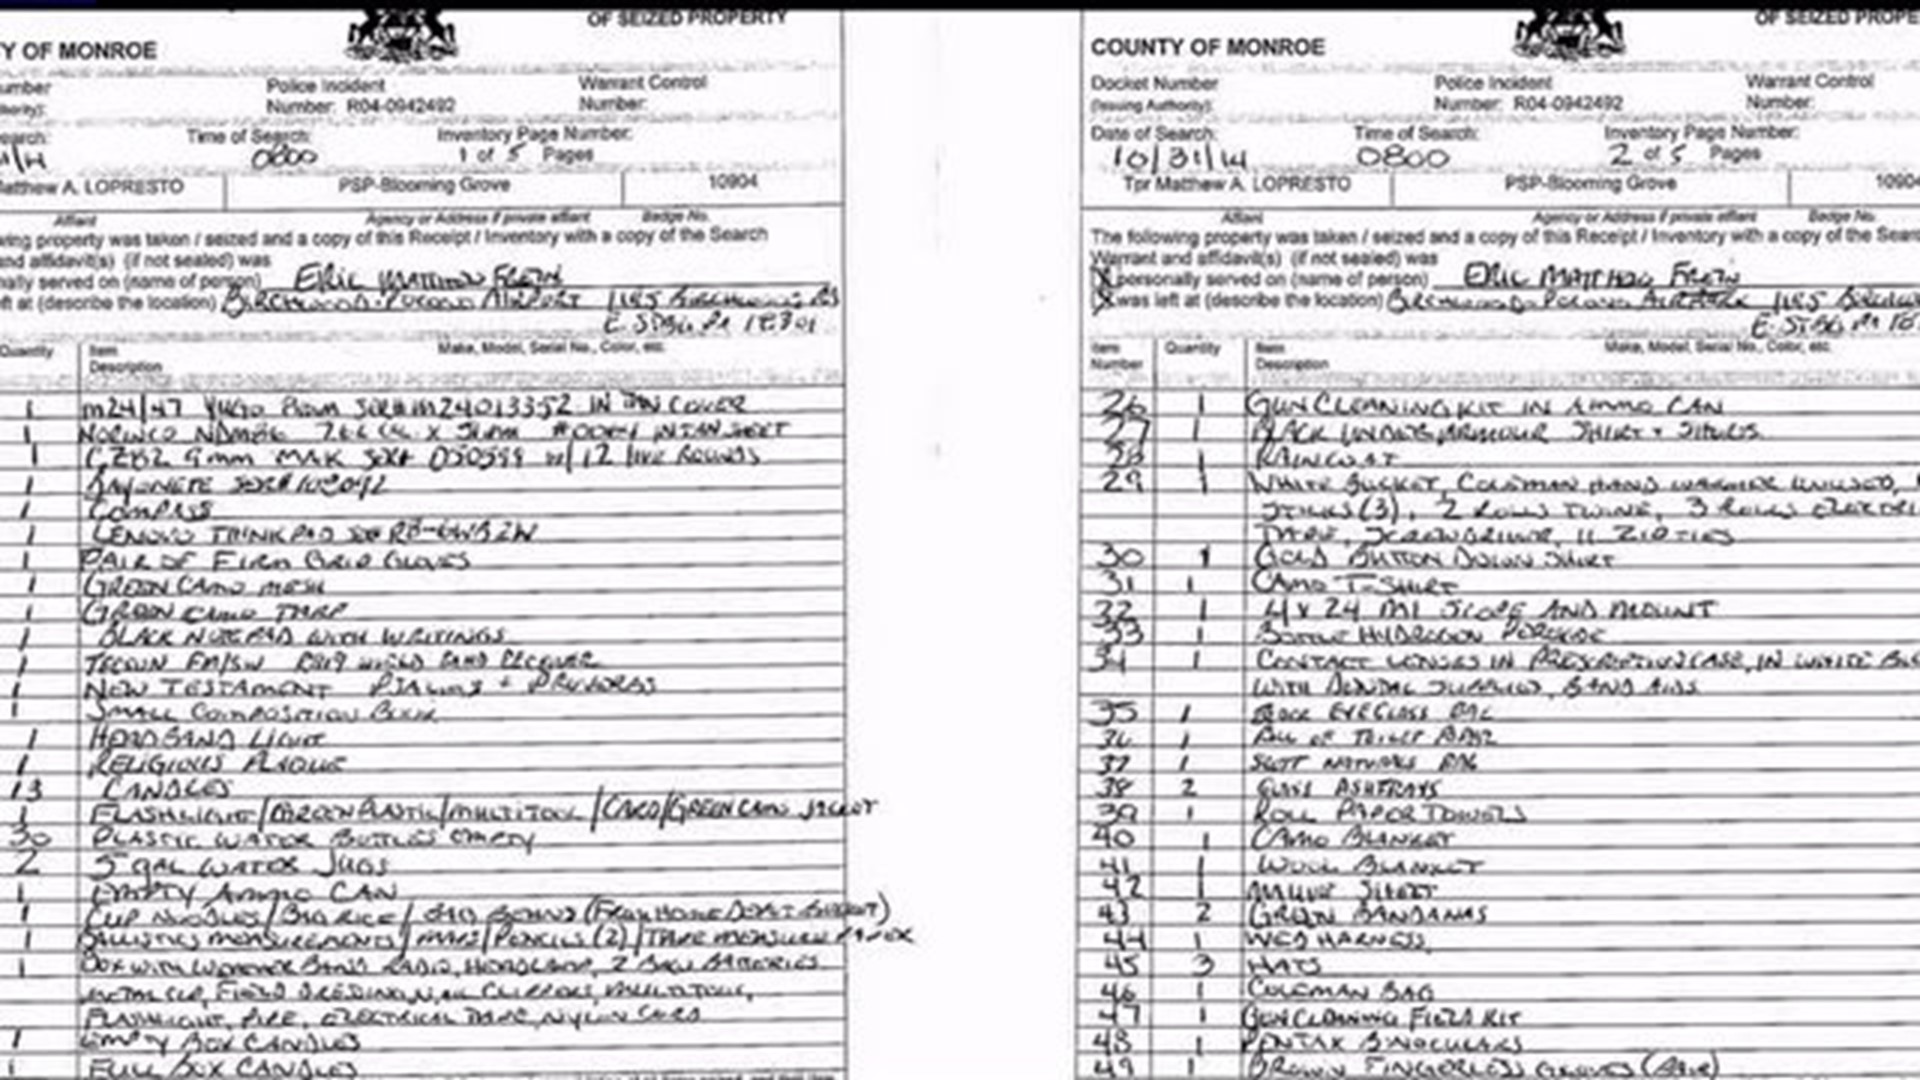 Search warrant lists 100+ items found in Frein`s hangar hideout